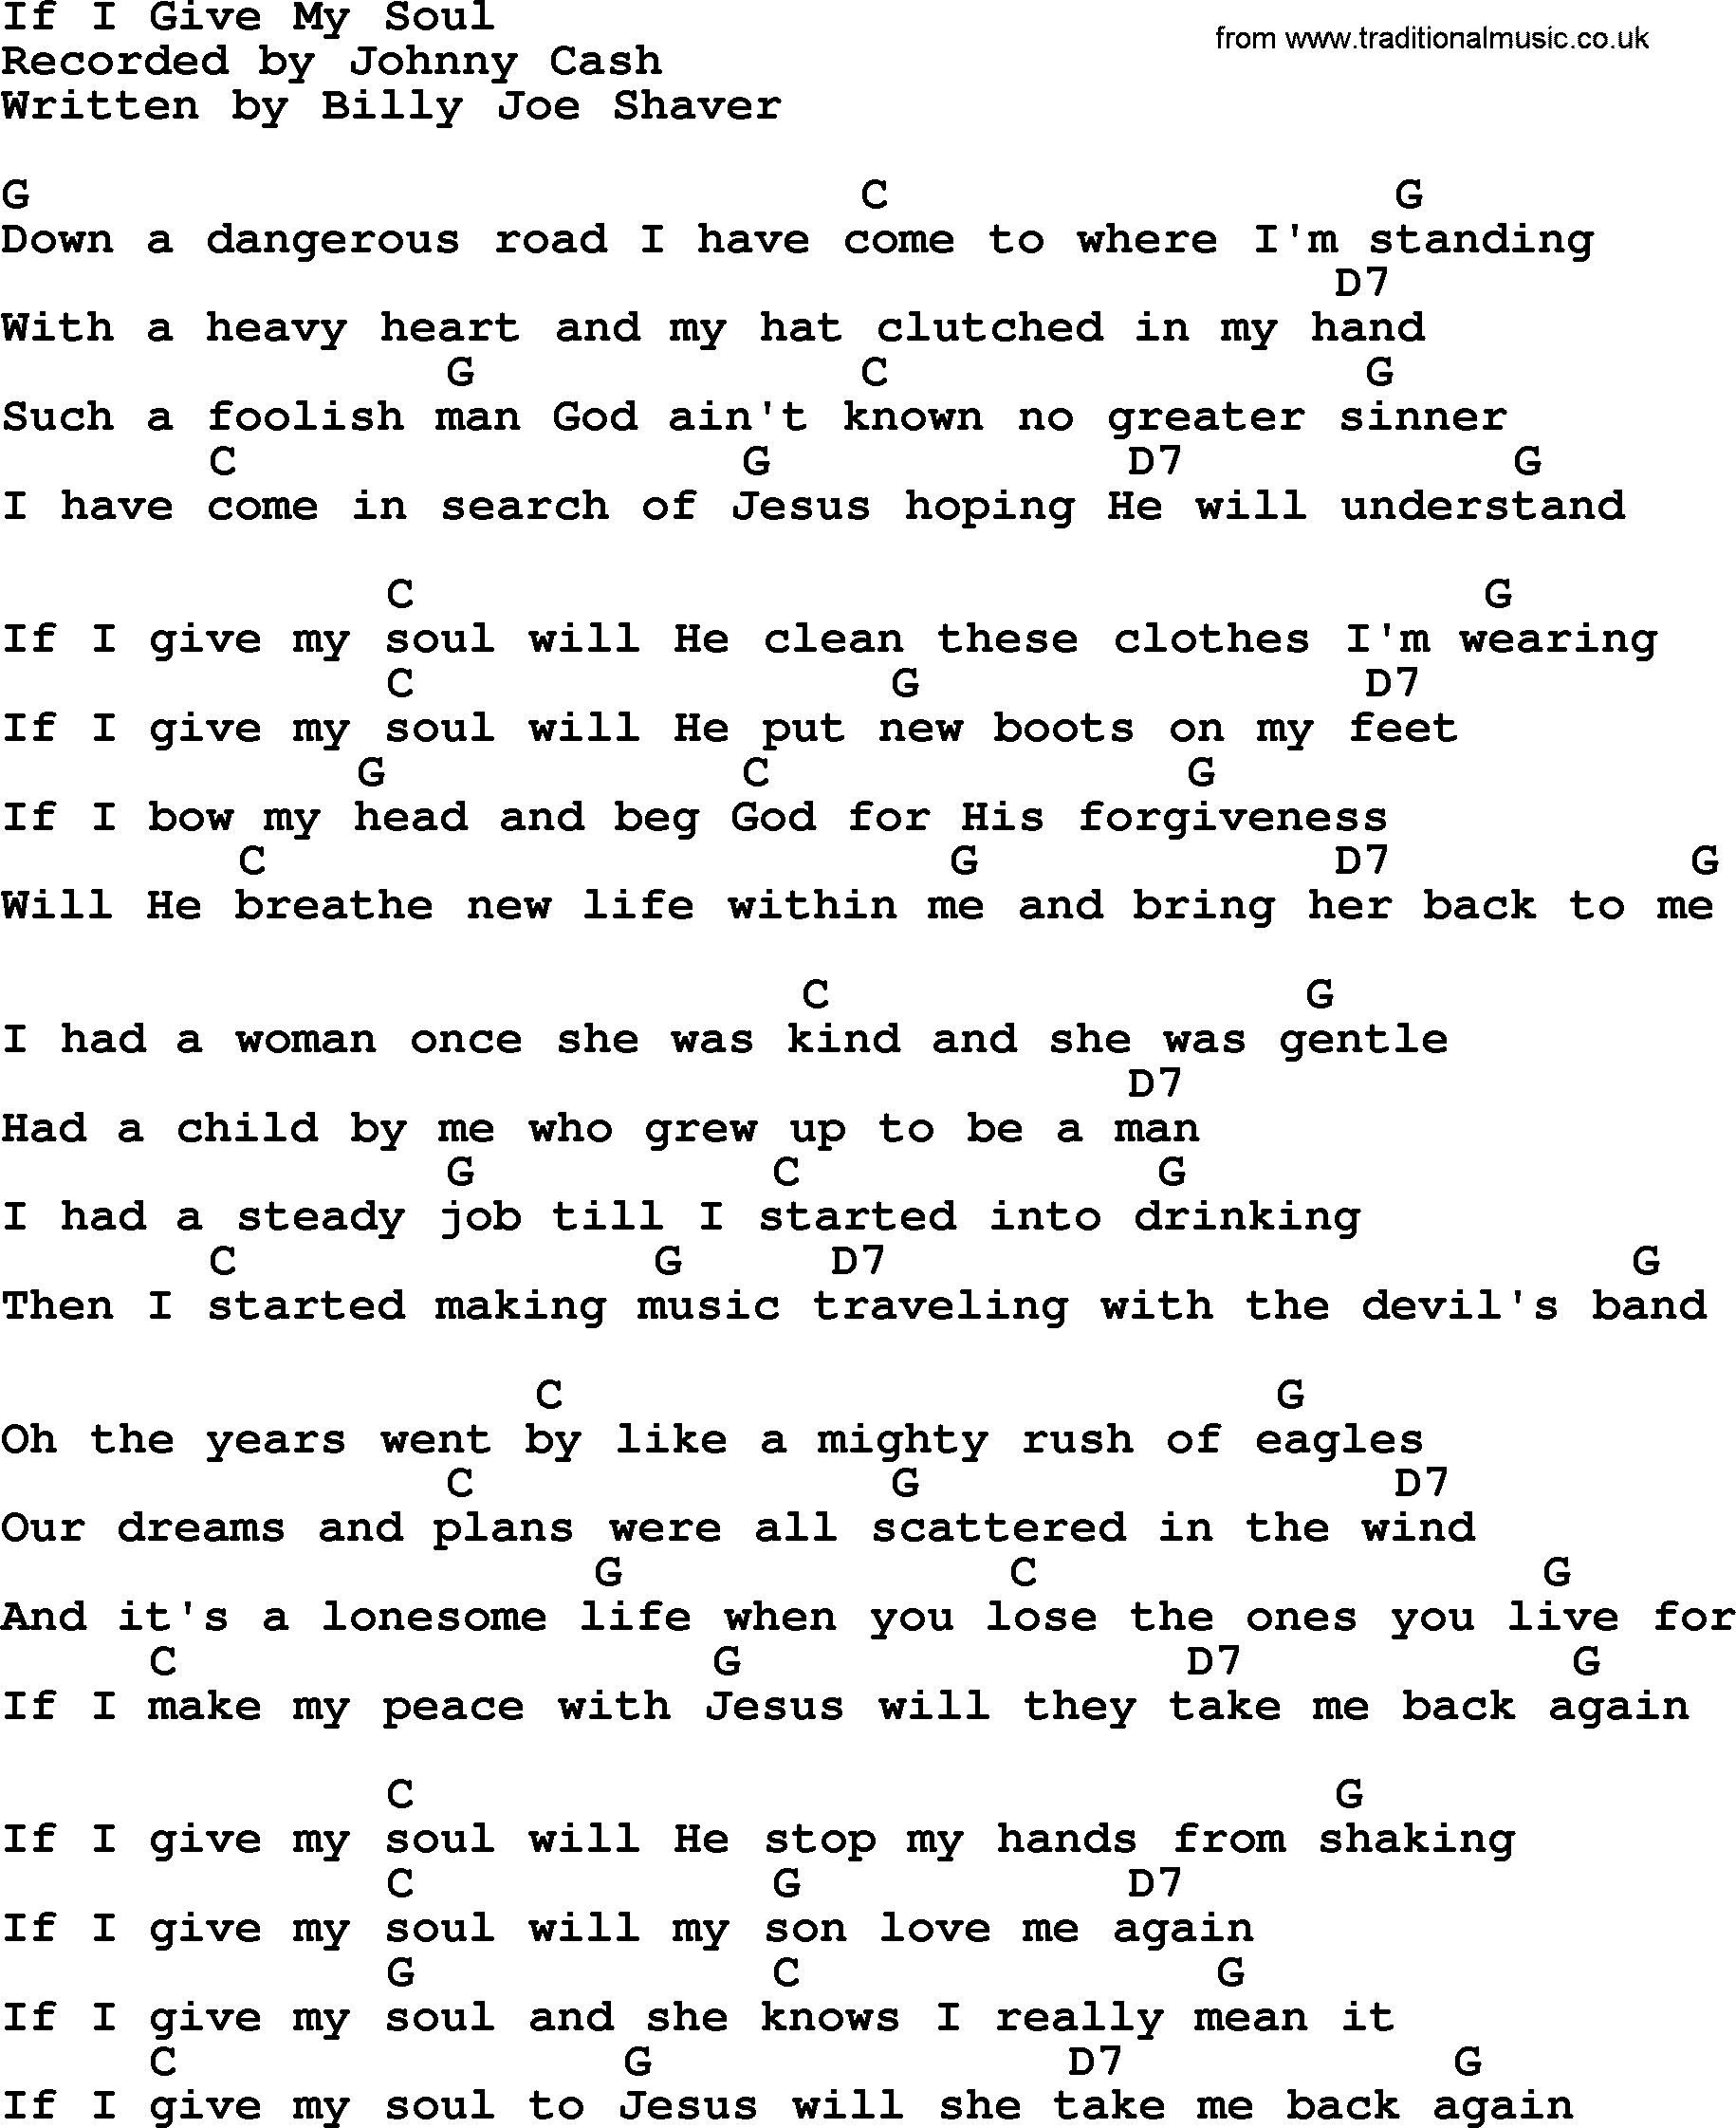 Johnny Cash song If I Give My Soul, lyrics and chords